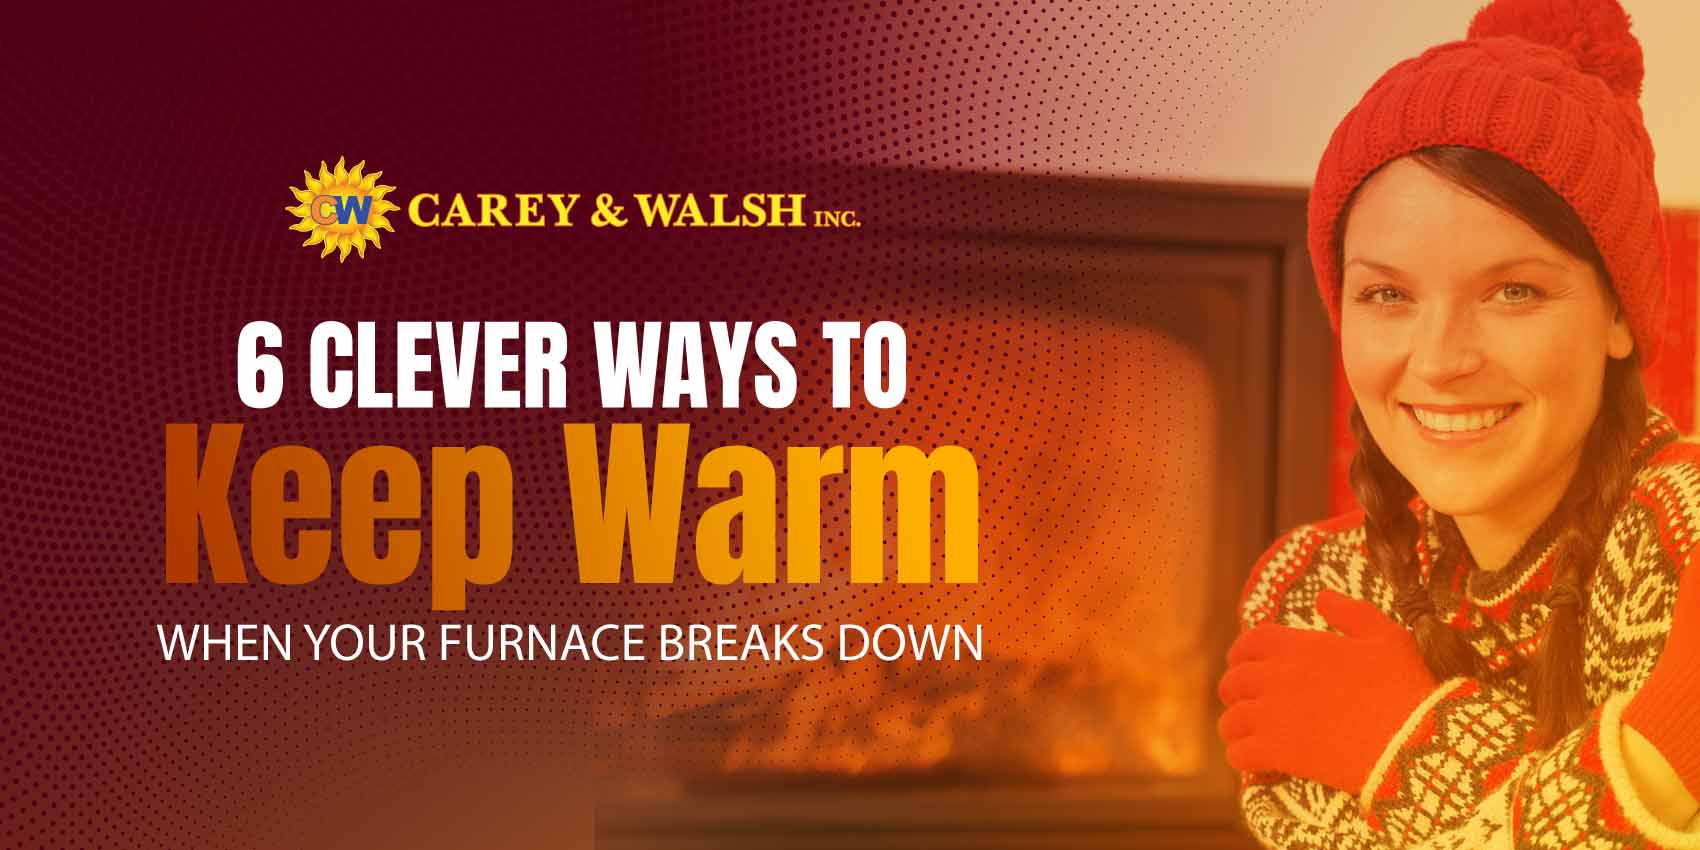 6 Clever Ways to Stay Warm When Your Furnace Breaks Down